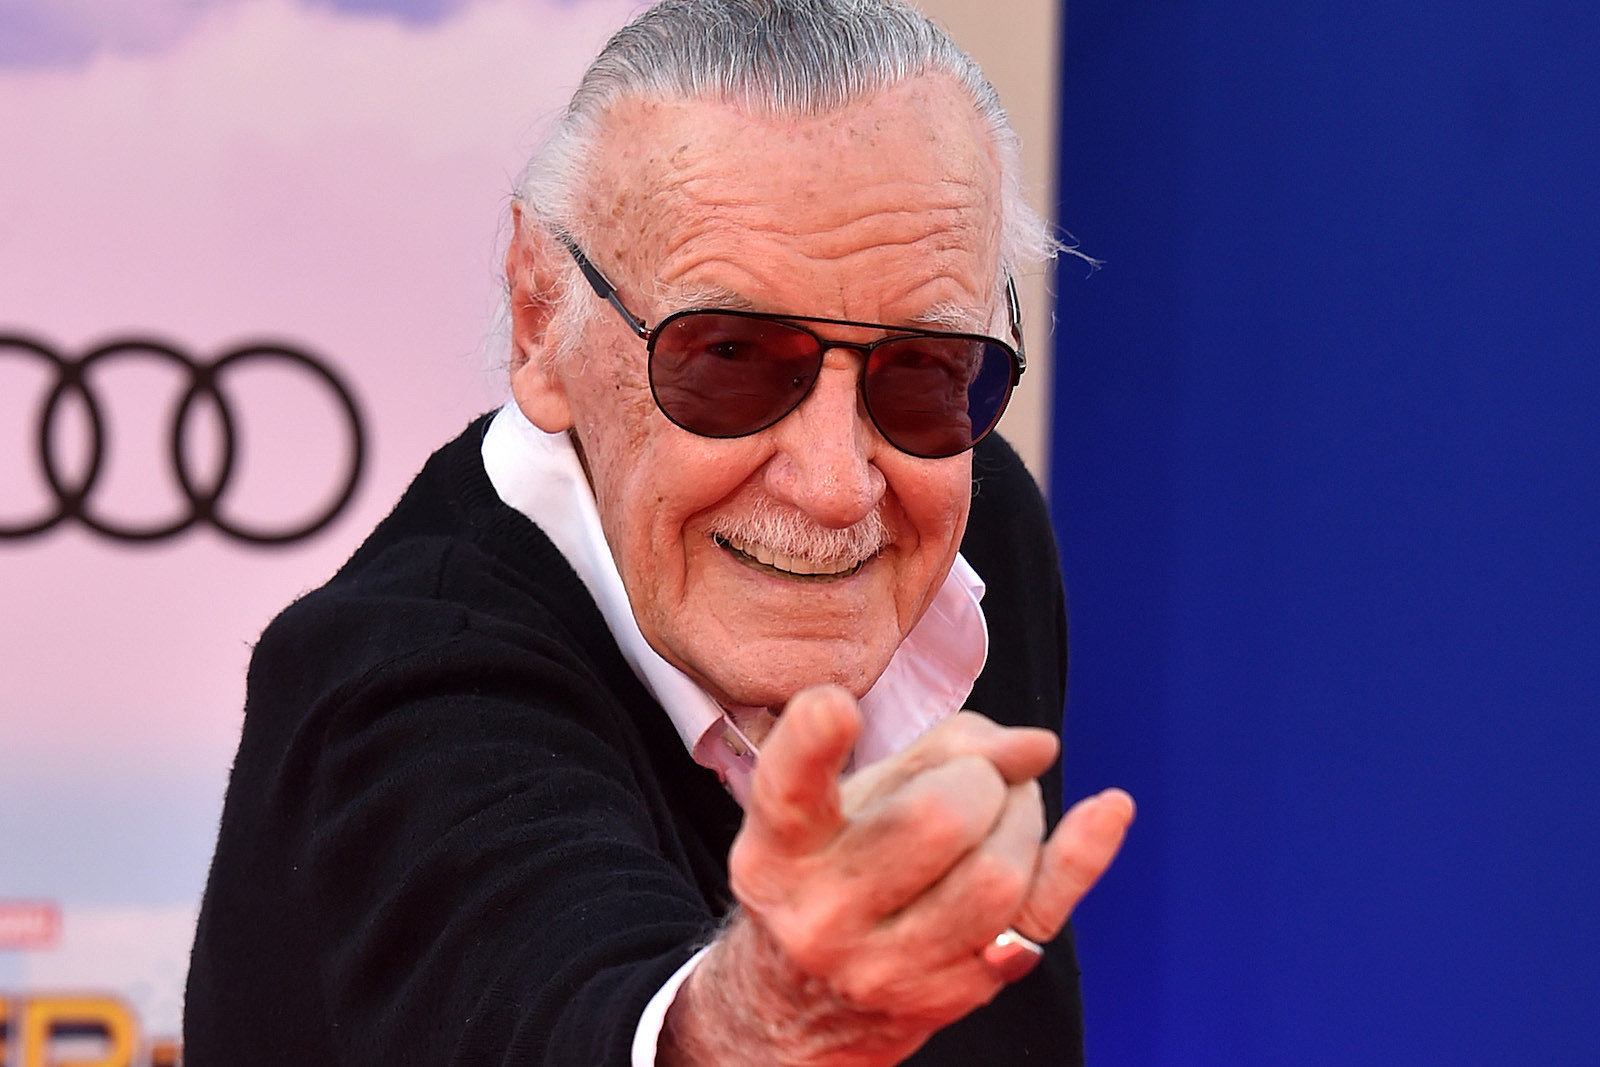 Fox's X-Men Movies Set The Bar For Stan Lee Cameos The MCU Never Matched